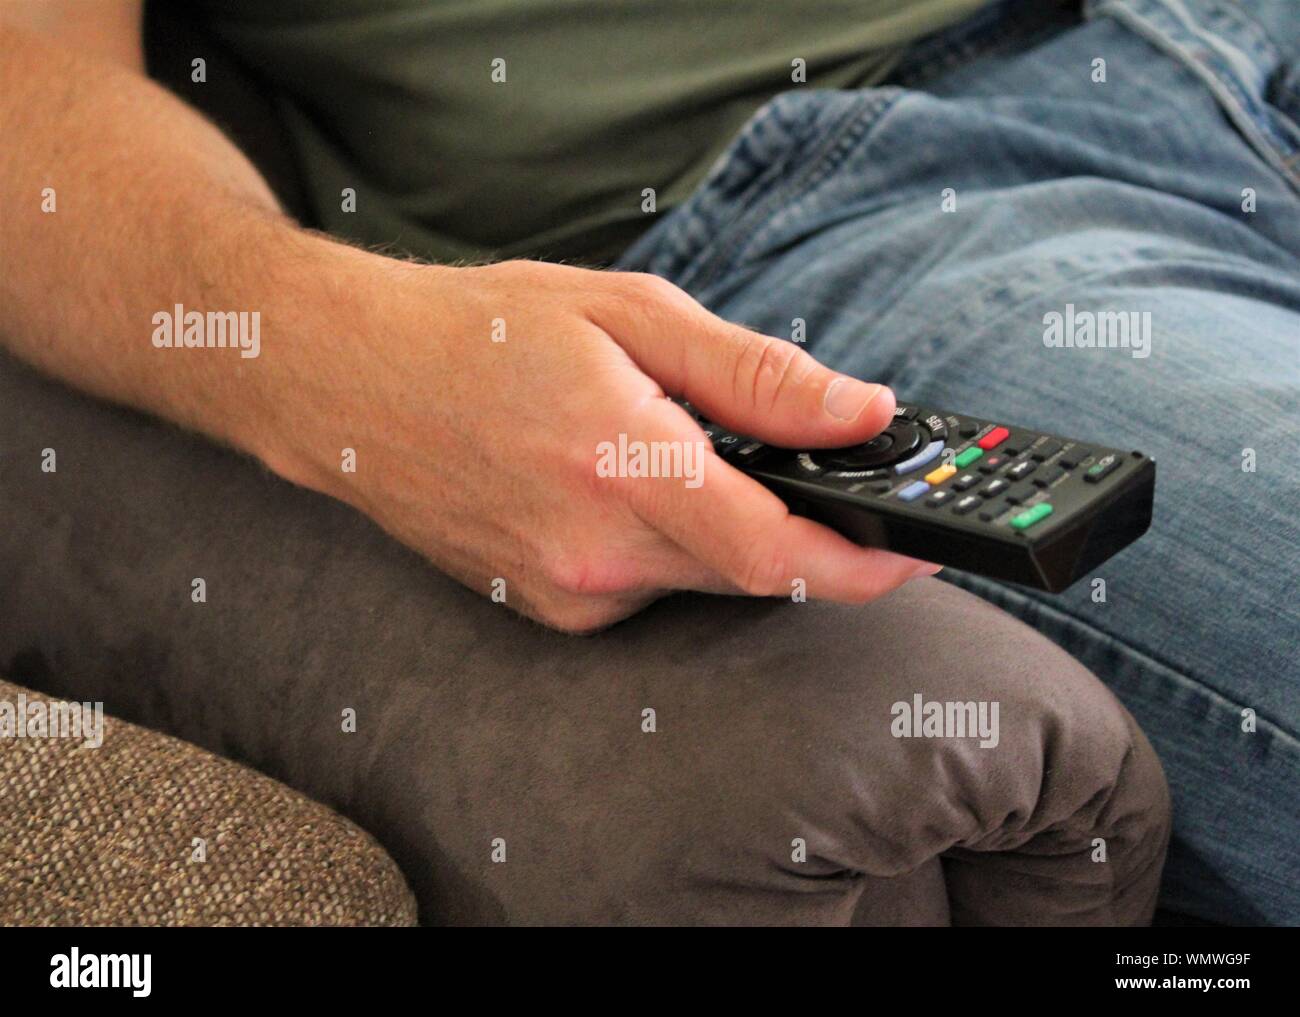 A close up of a man's hand using a television remote control while sitting in an armchair Stock Photo